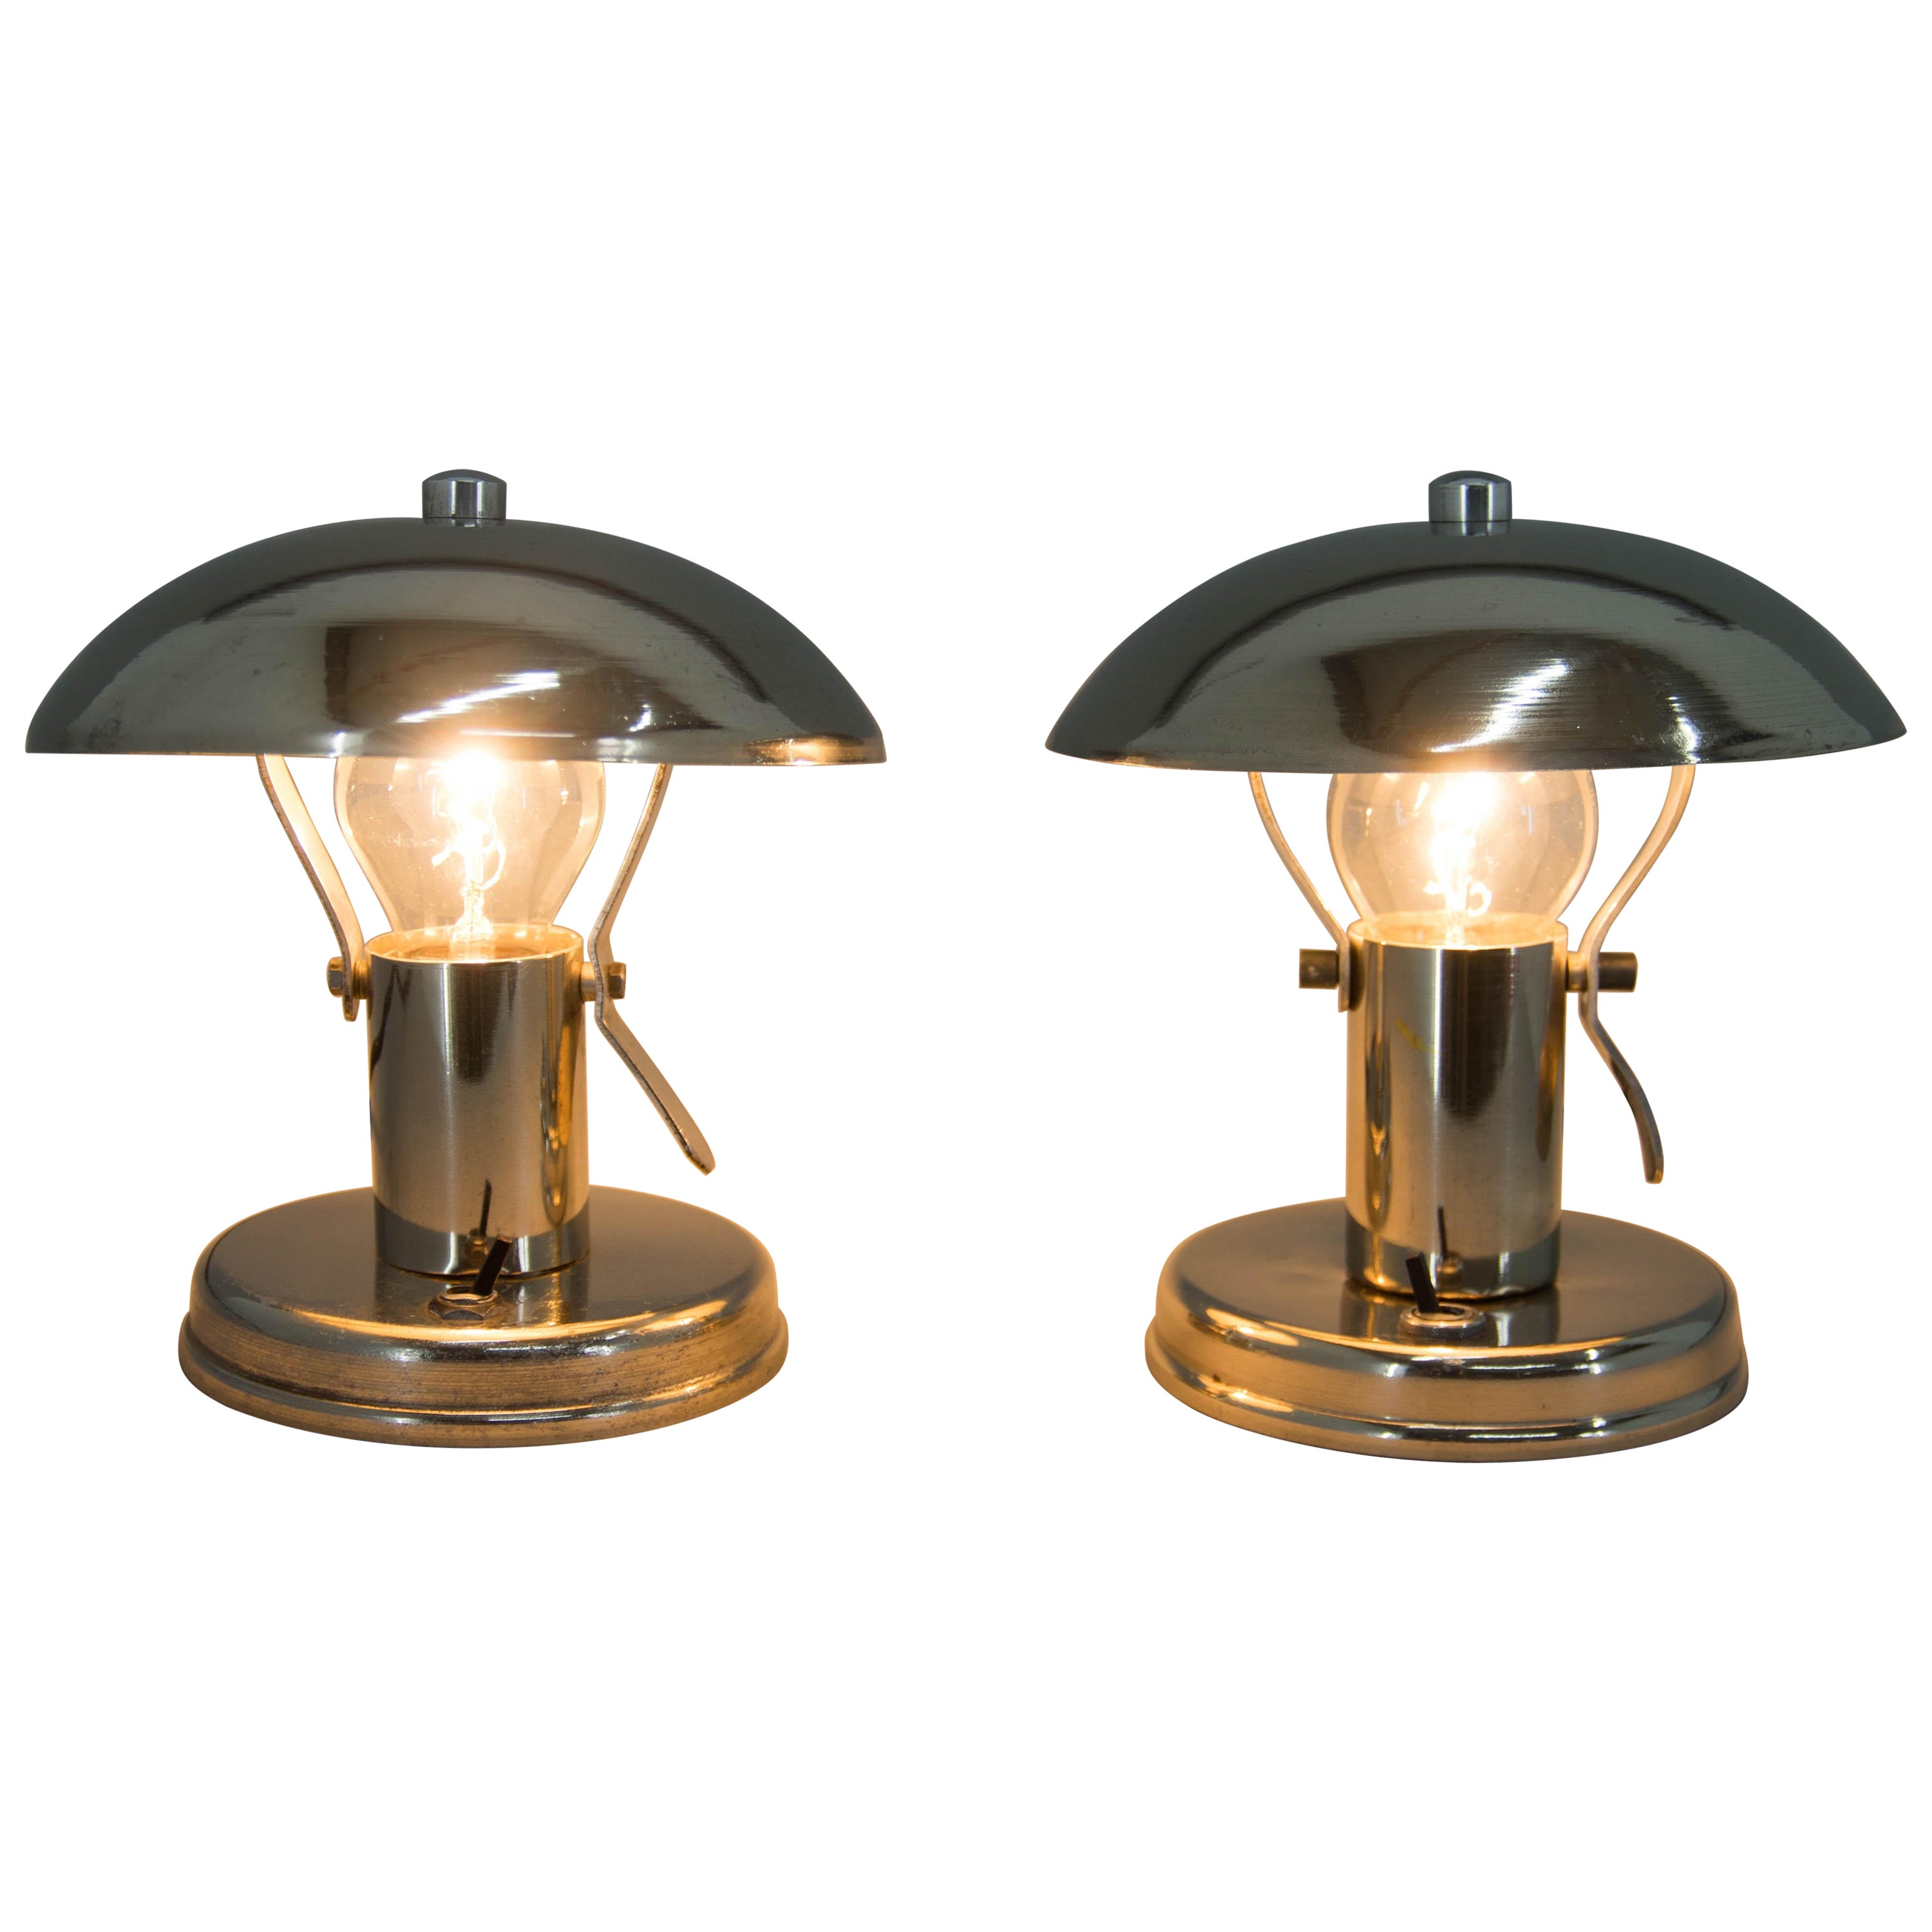 Set of Two Bauhaus Table Lamps, 1930s